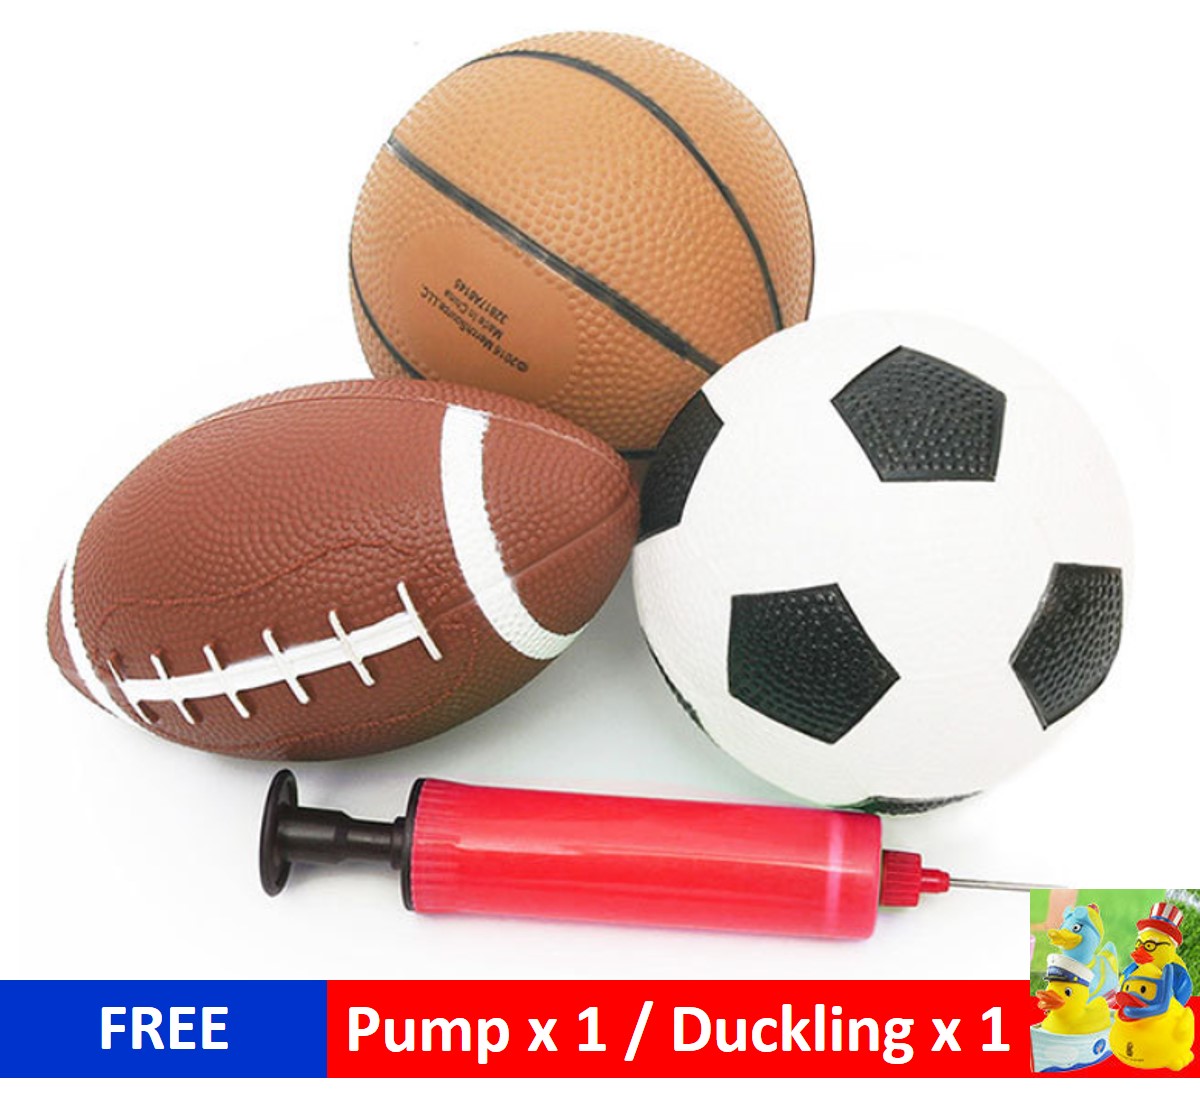 SPORTS 3 Pack BALLS Football Basketball Soccer Ball 2 Sets Avail Kids Play Toy 